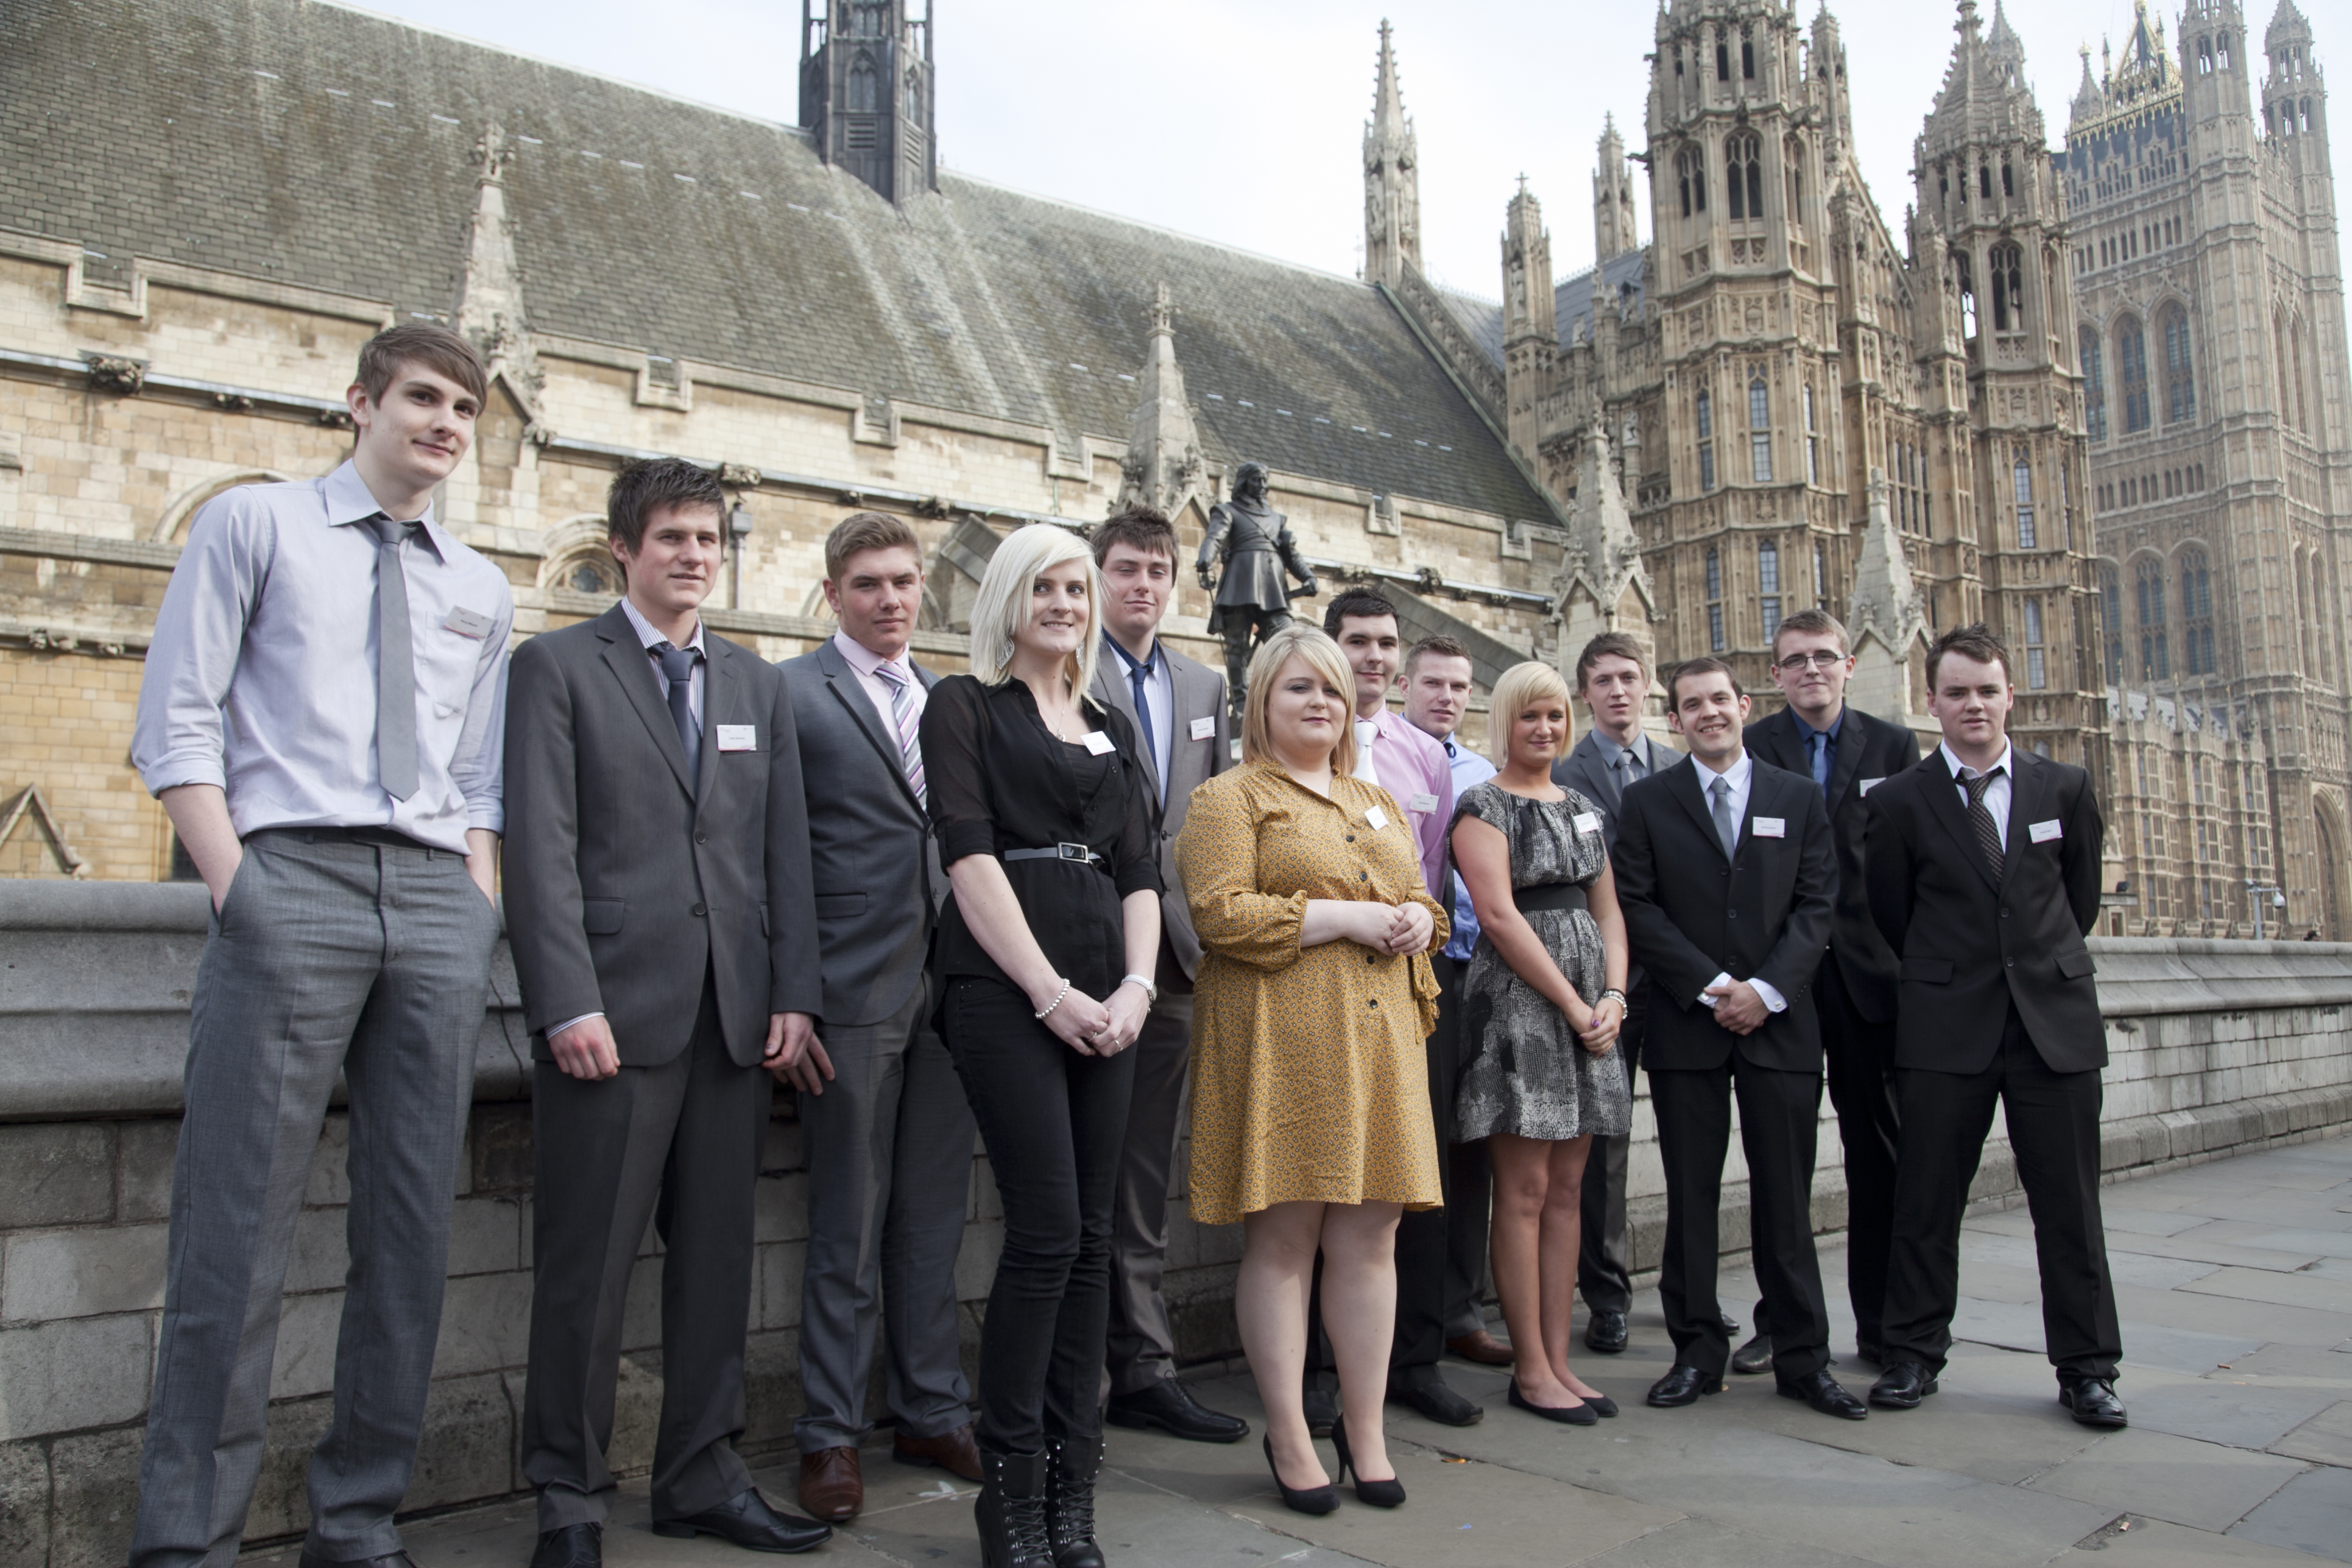 Star apprentices outside the House of Lords